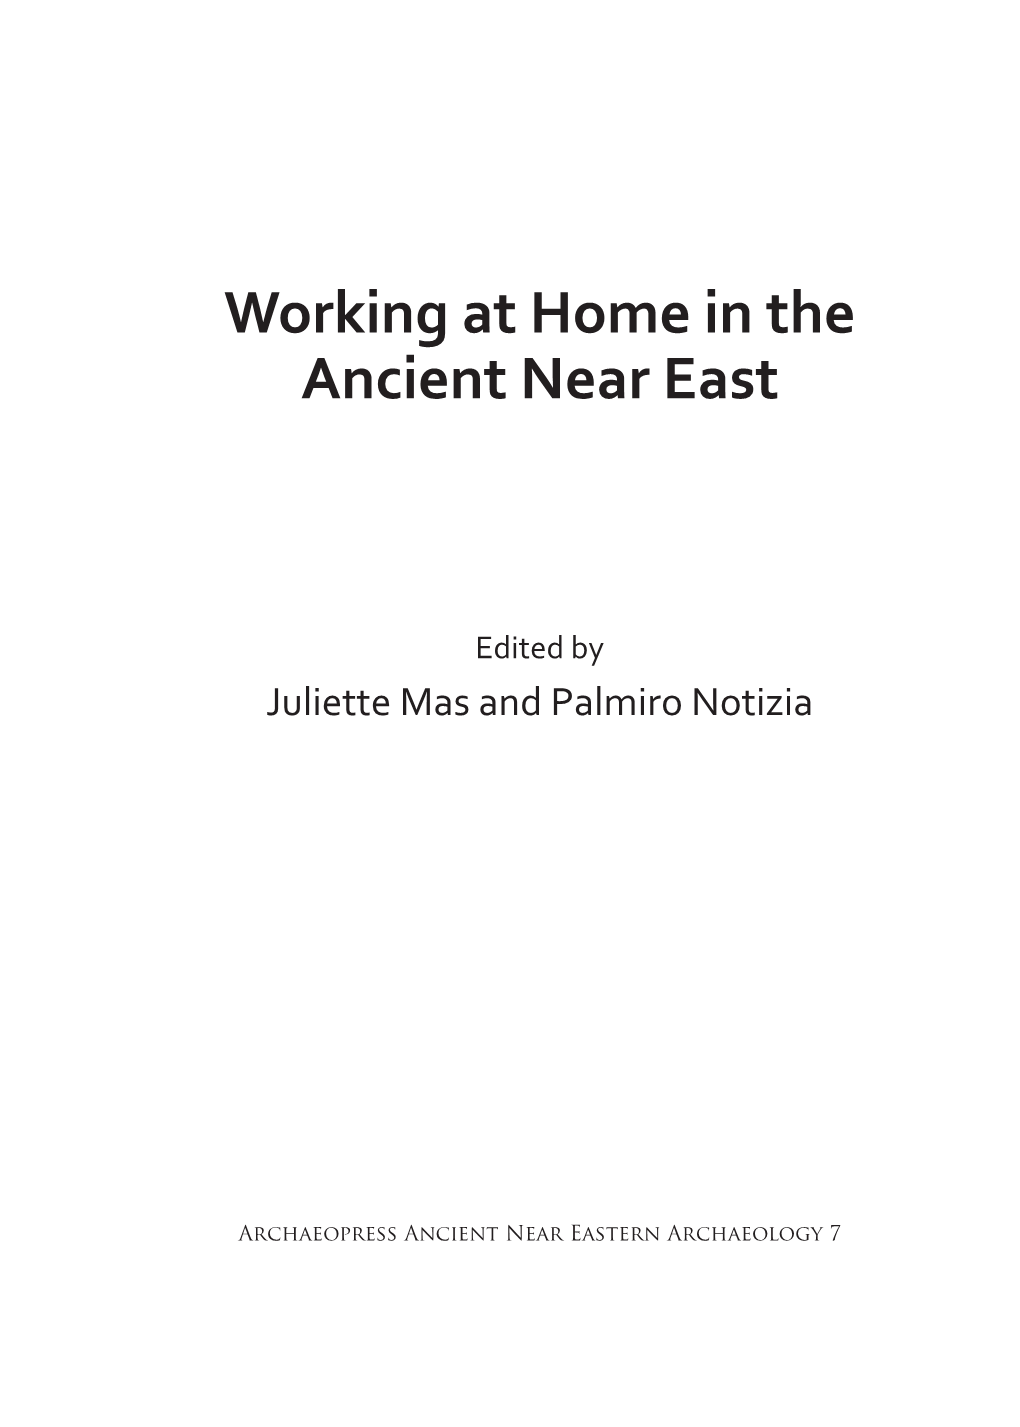 Working at Home in the Ancient Near East